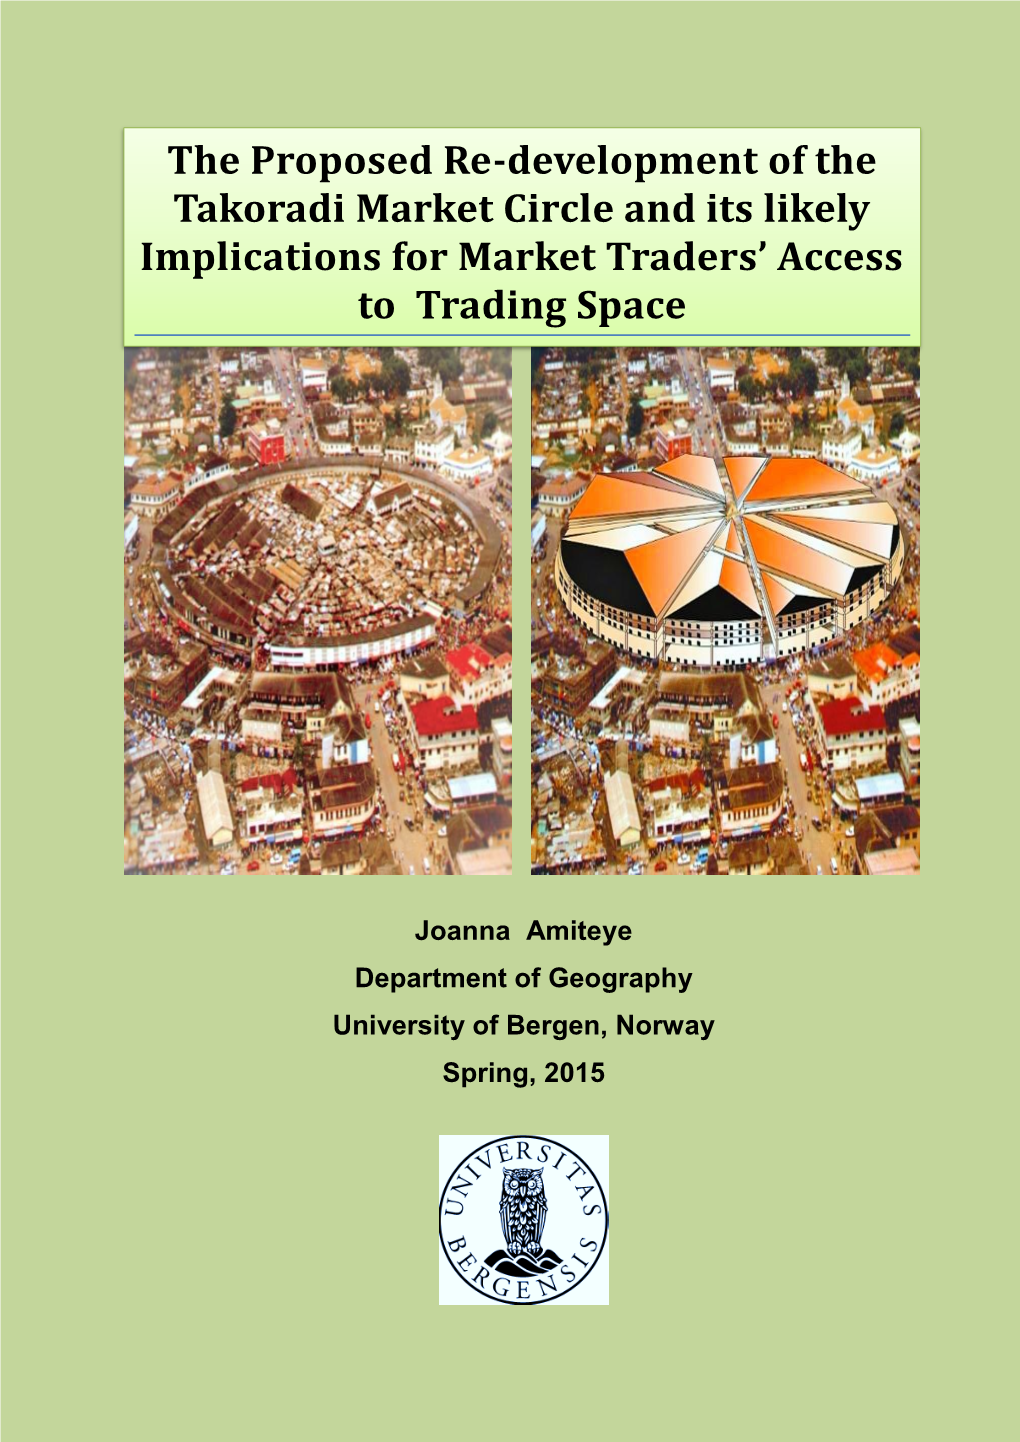 The Proposed Re-Development of the Takoradi Market Circle and Its Likely Implications for Market Traders’ Access to Trading Space